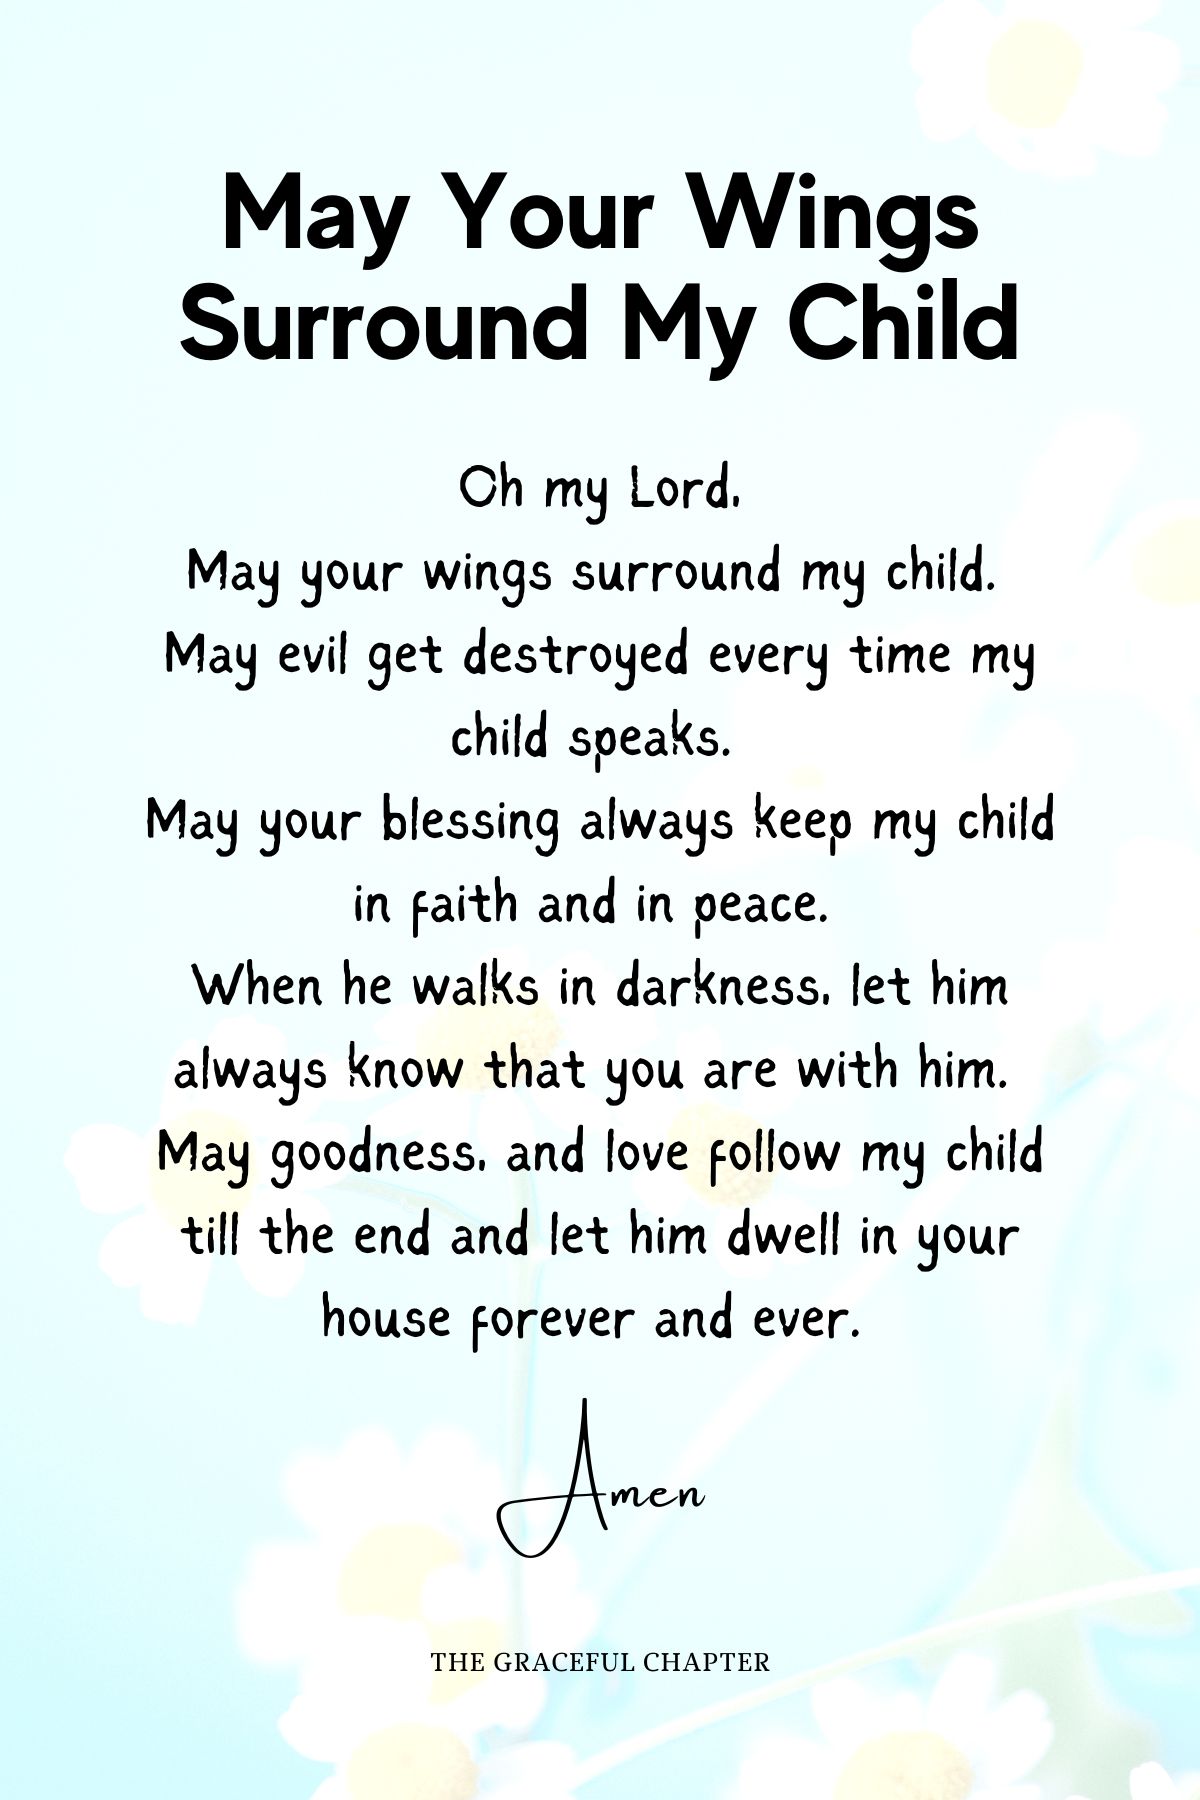 May your wings surround my child prayers for infants 